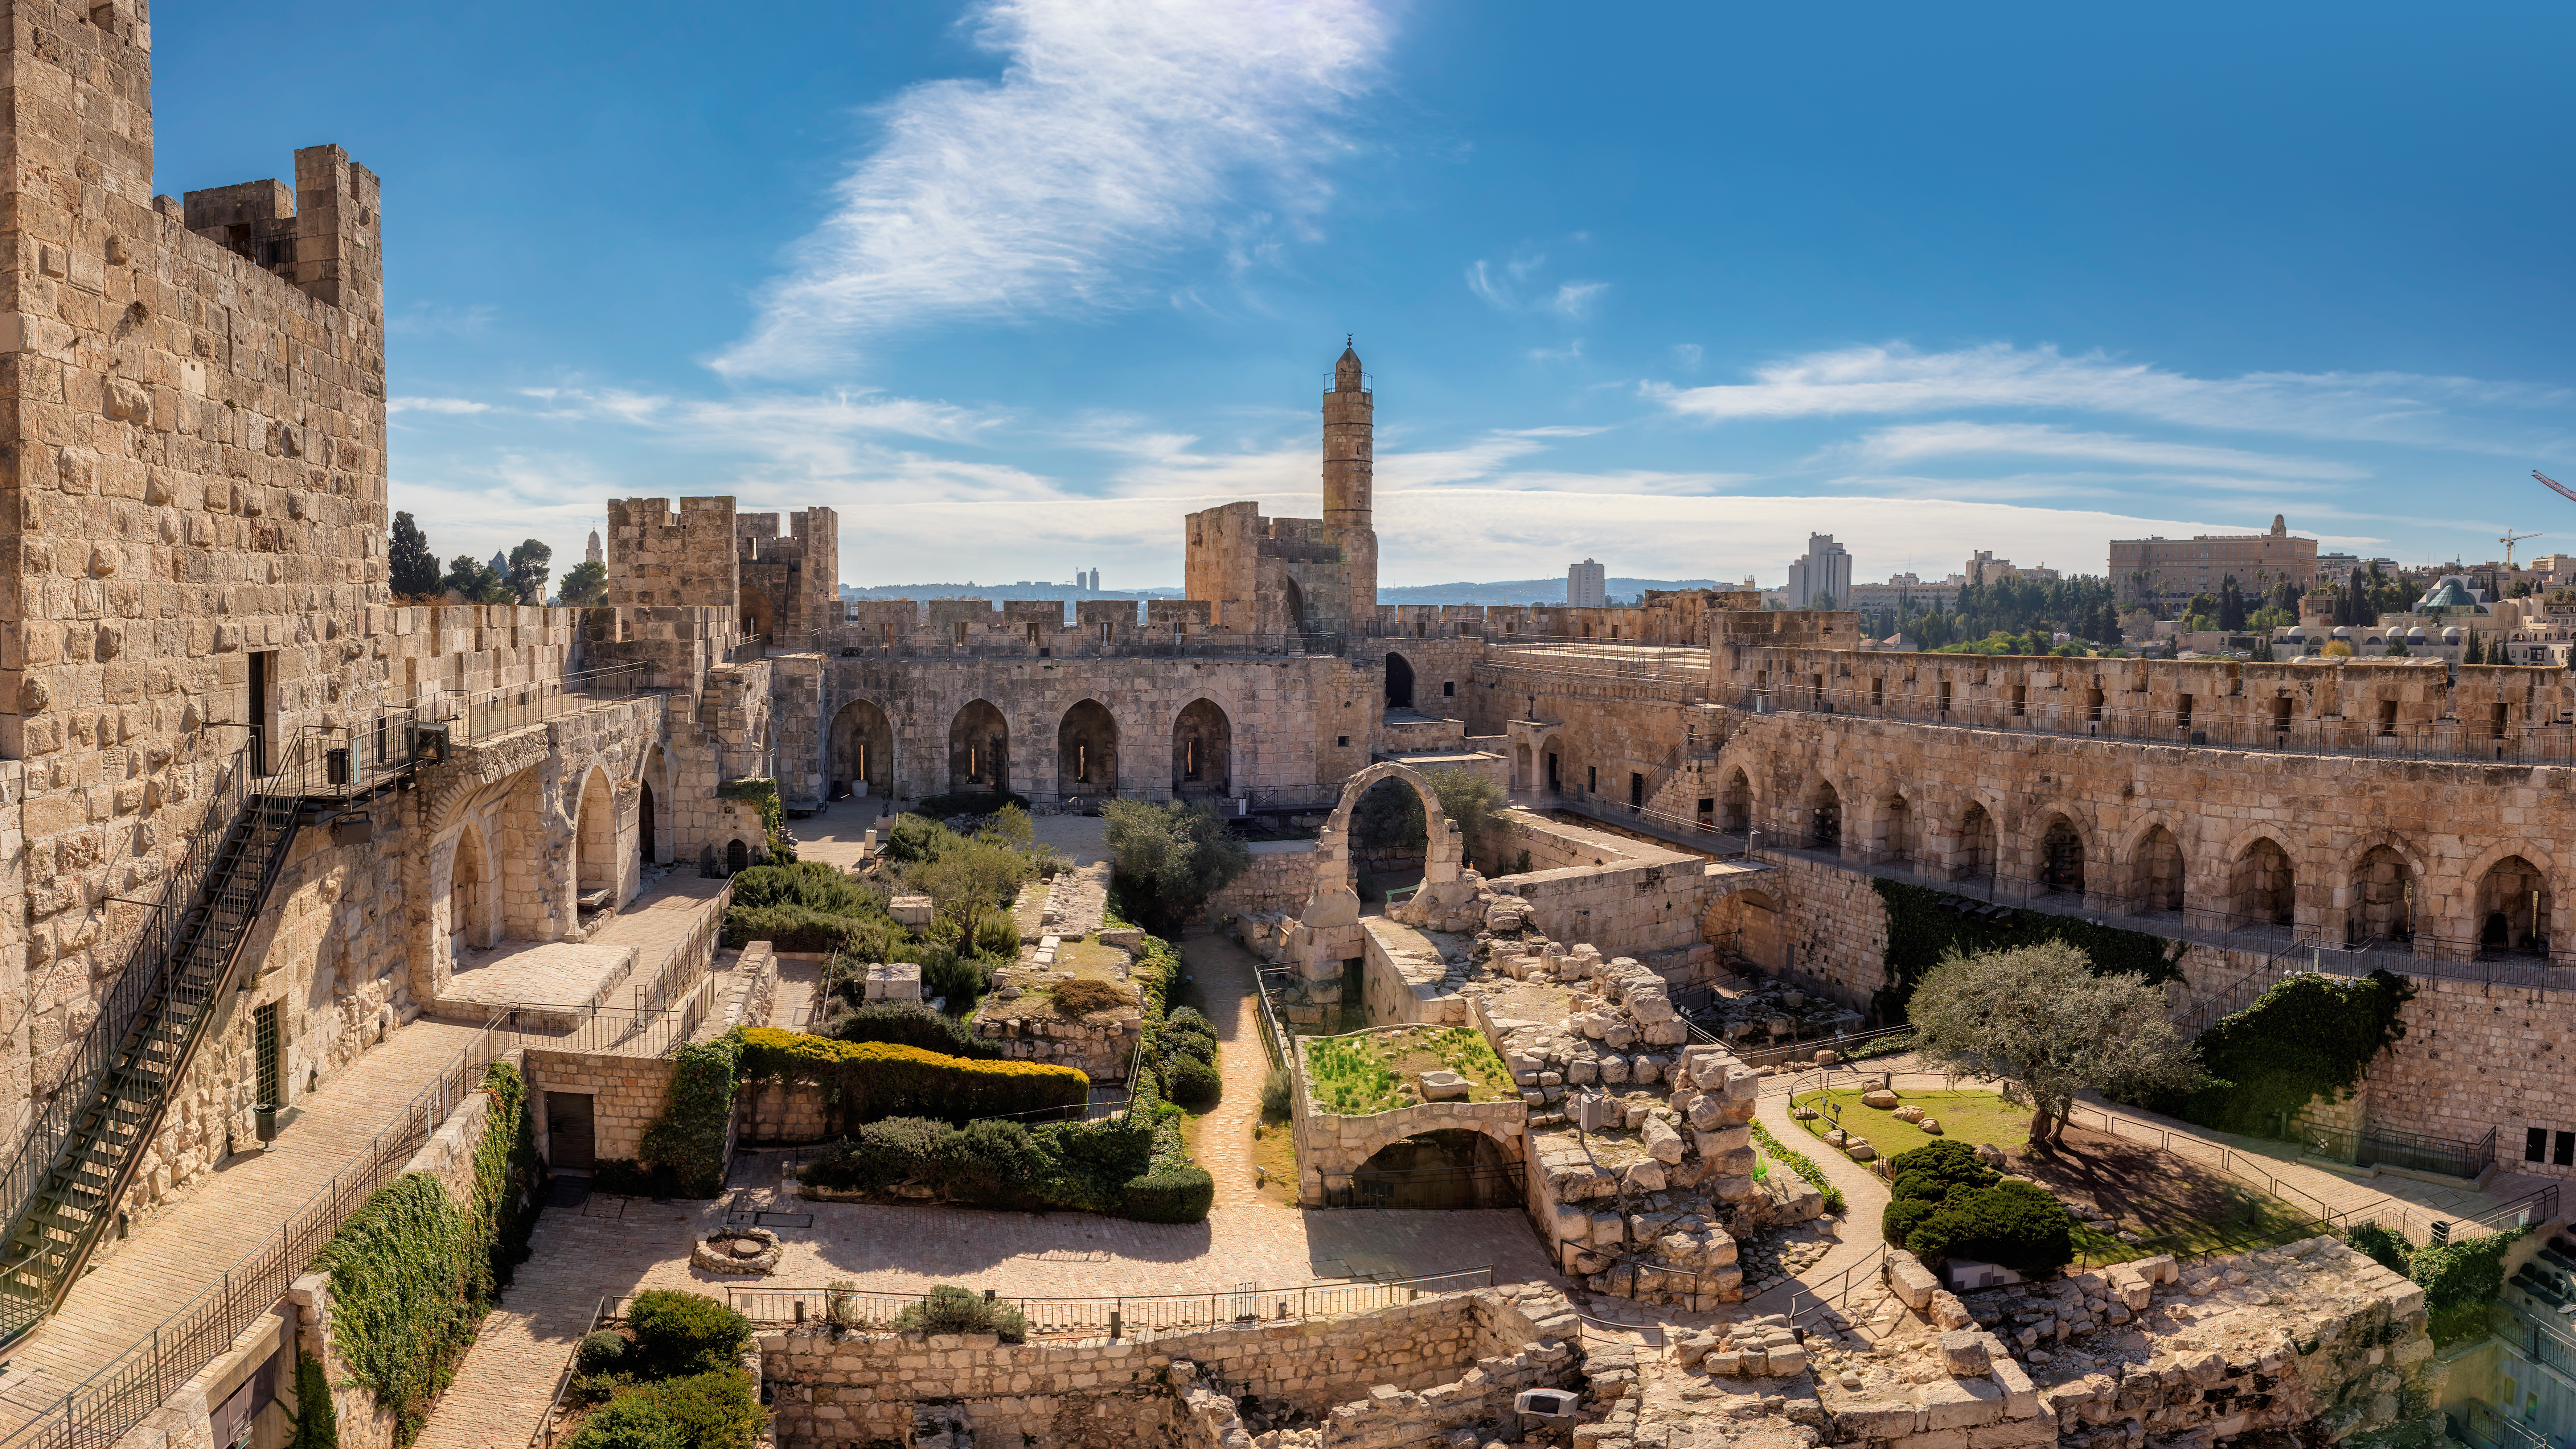 Panorama of David's tower in old city of Jerusalem